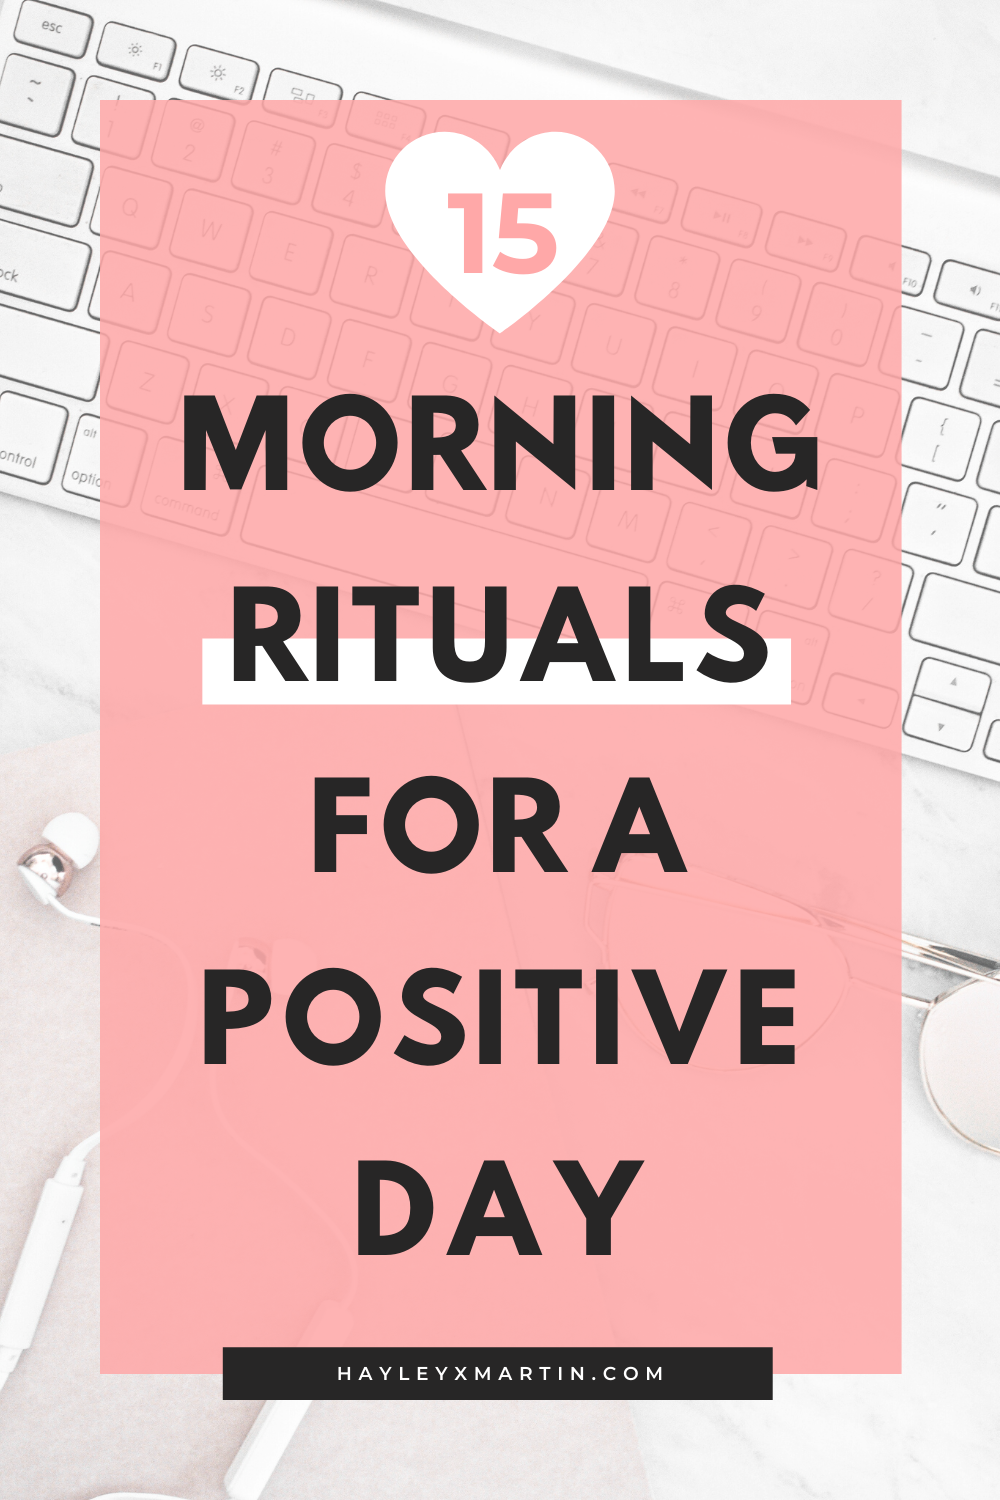 15 MORNING RITUALS FOR A POSITIVE DAY | HAYLEYXMARTIN